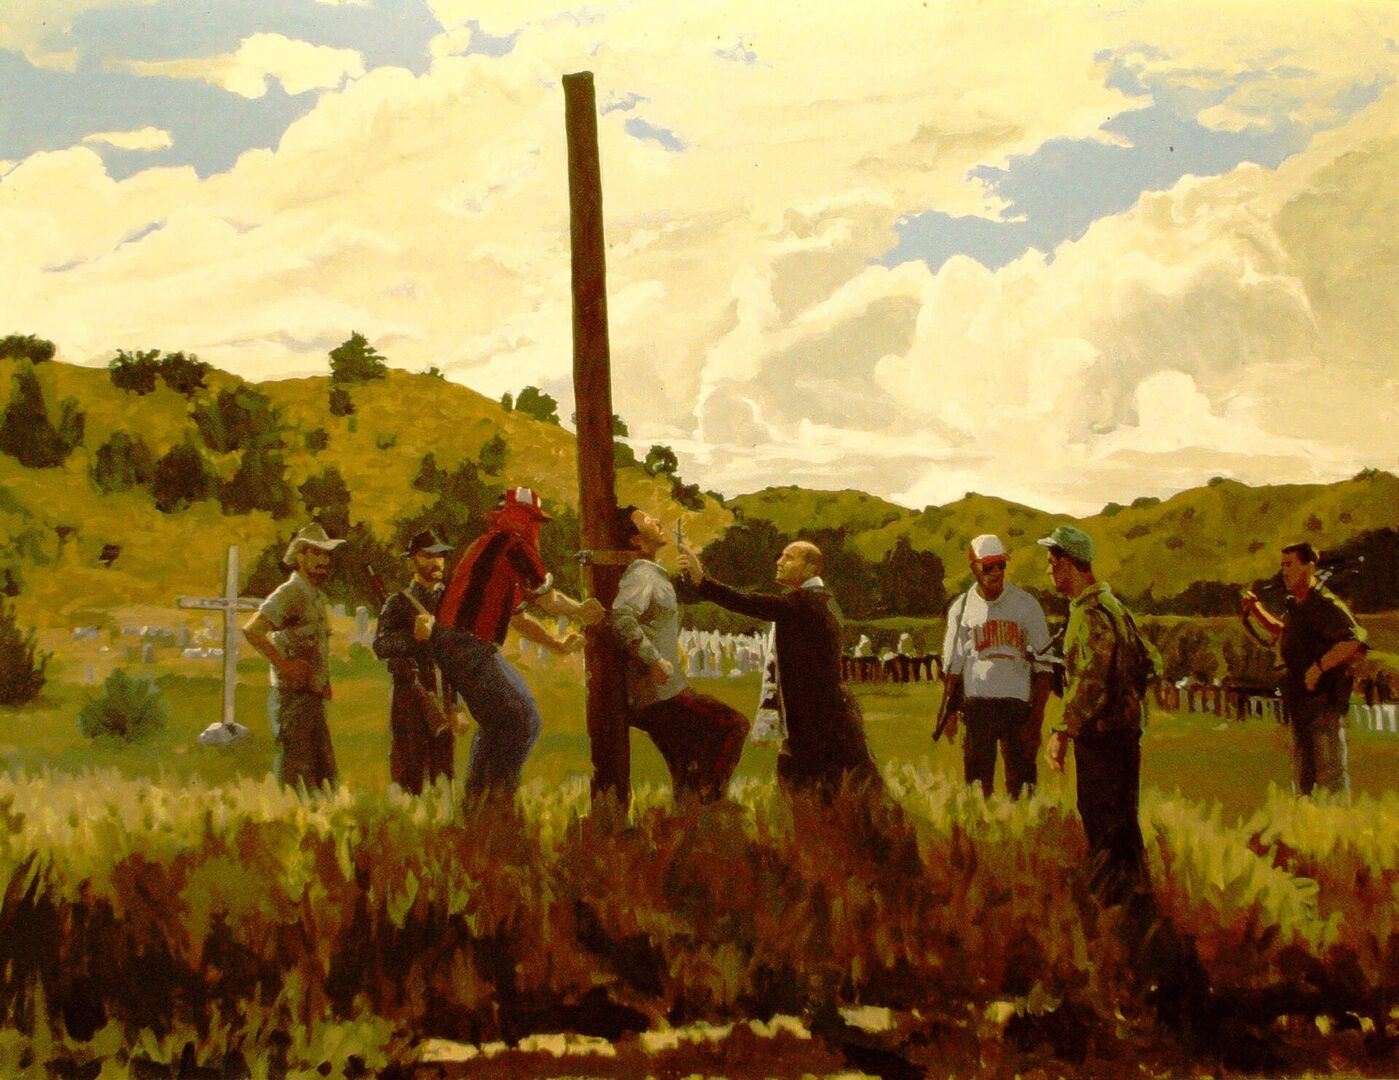 EXECUTION OF THE OFFICER<br>
1991<br>
36" x 48"
